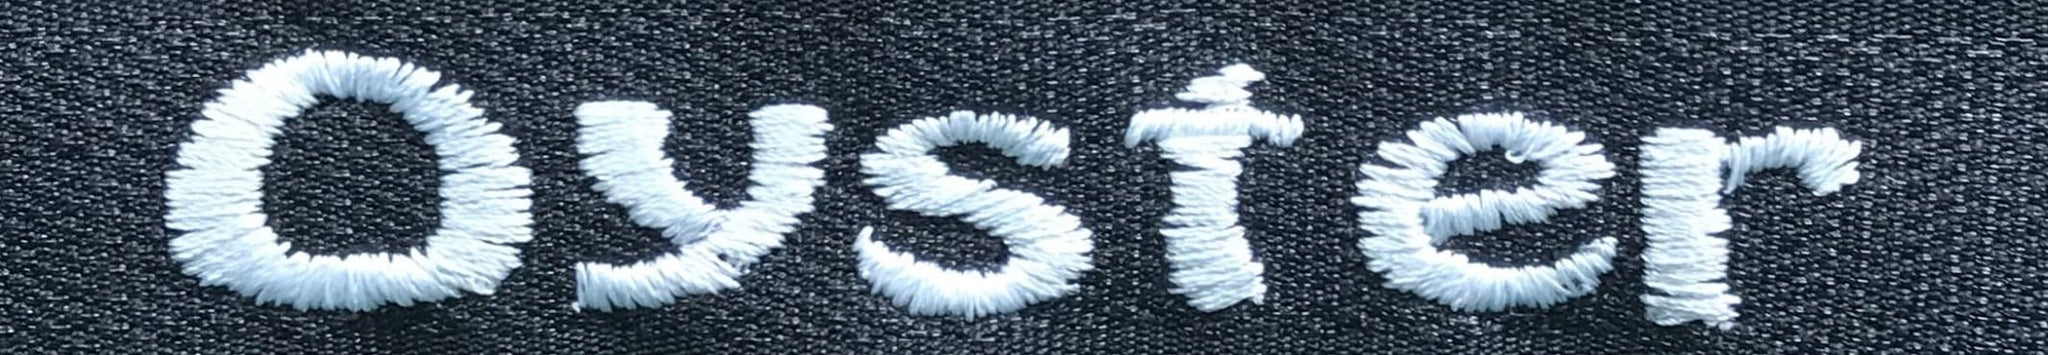 example of oyster embroidery